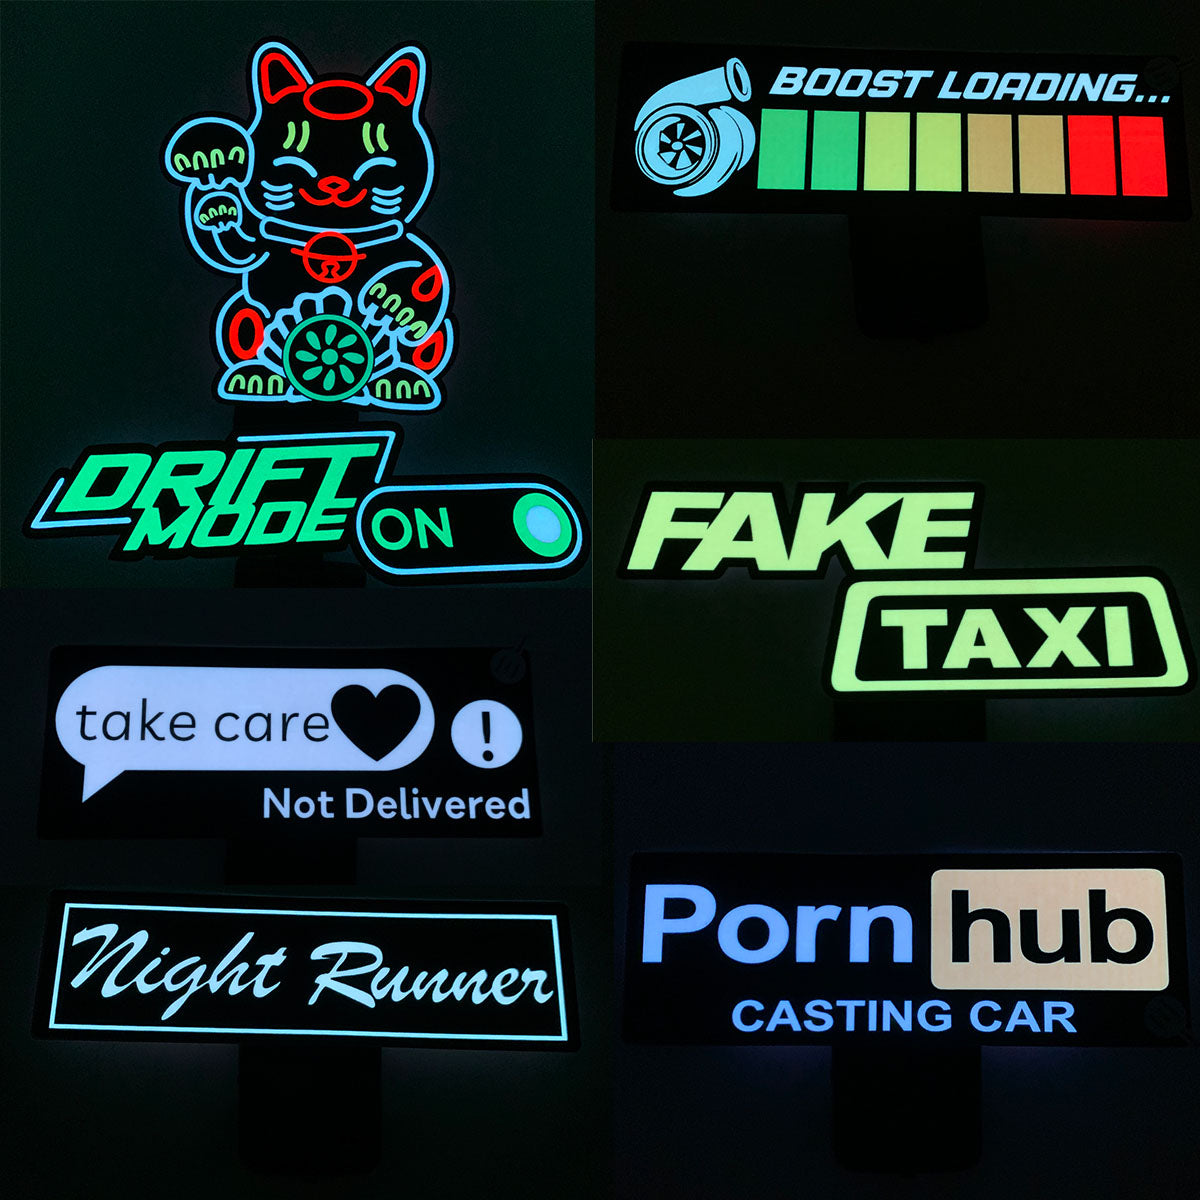 LED Animated/Sound activated stickers